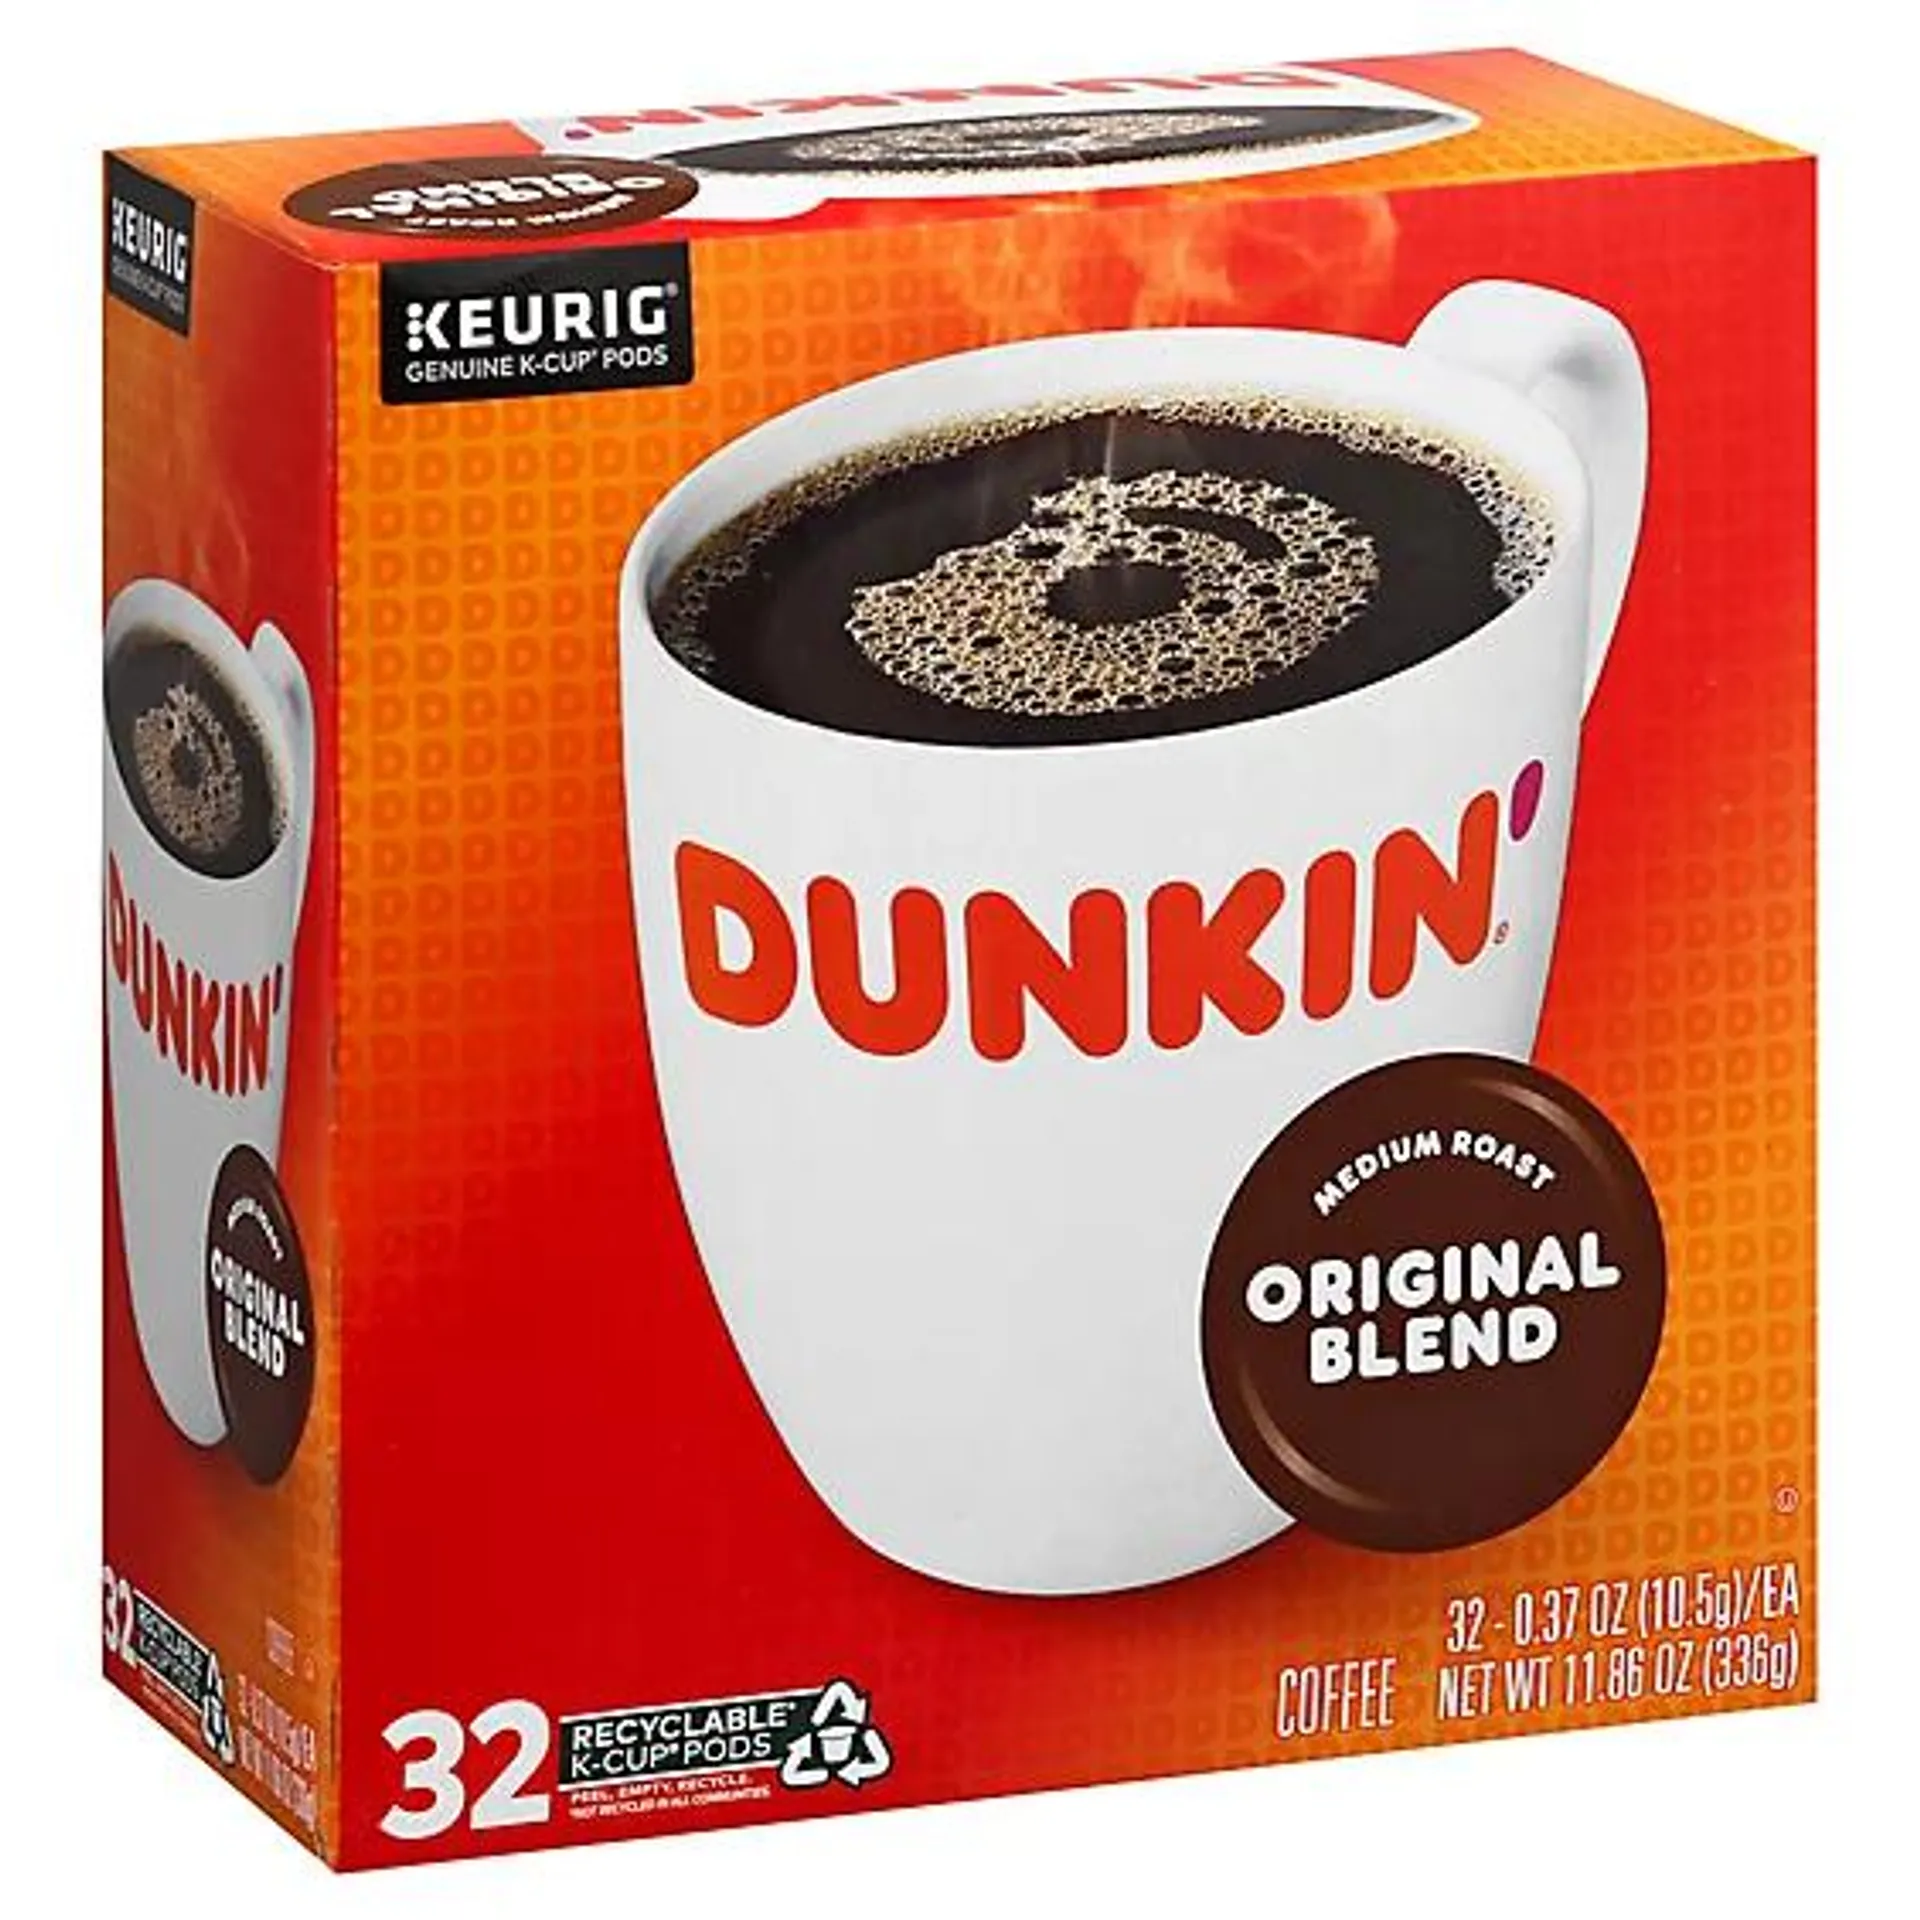 Dunkin Donuts Kcup Original Coffee - 32 Count